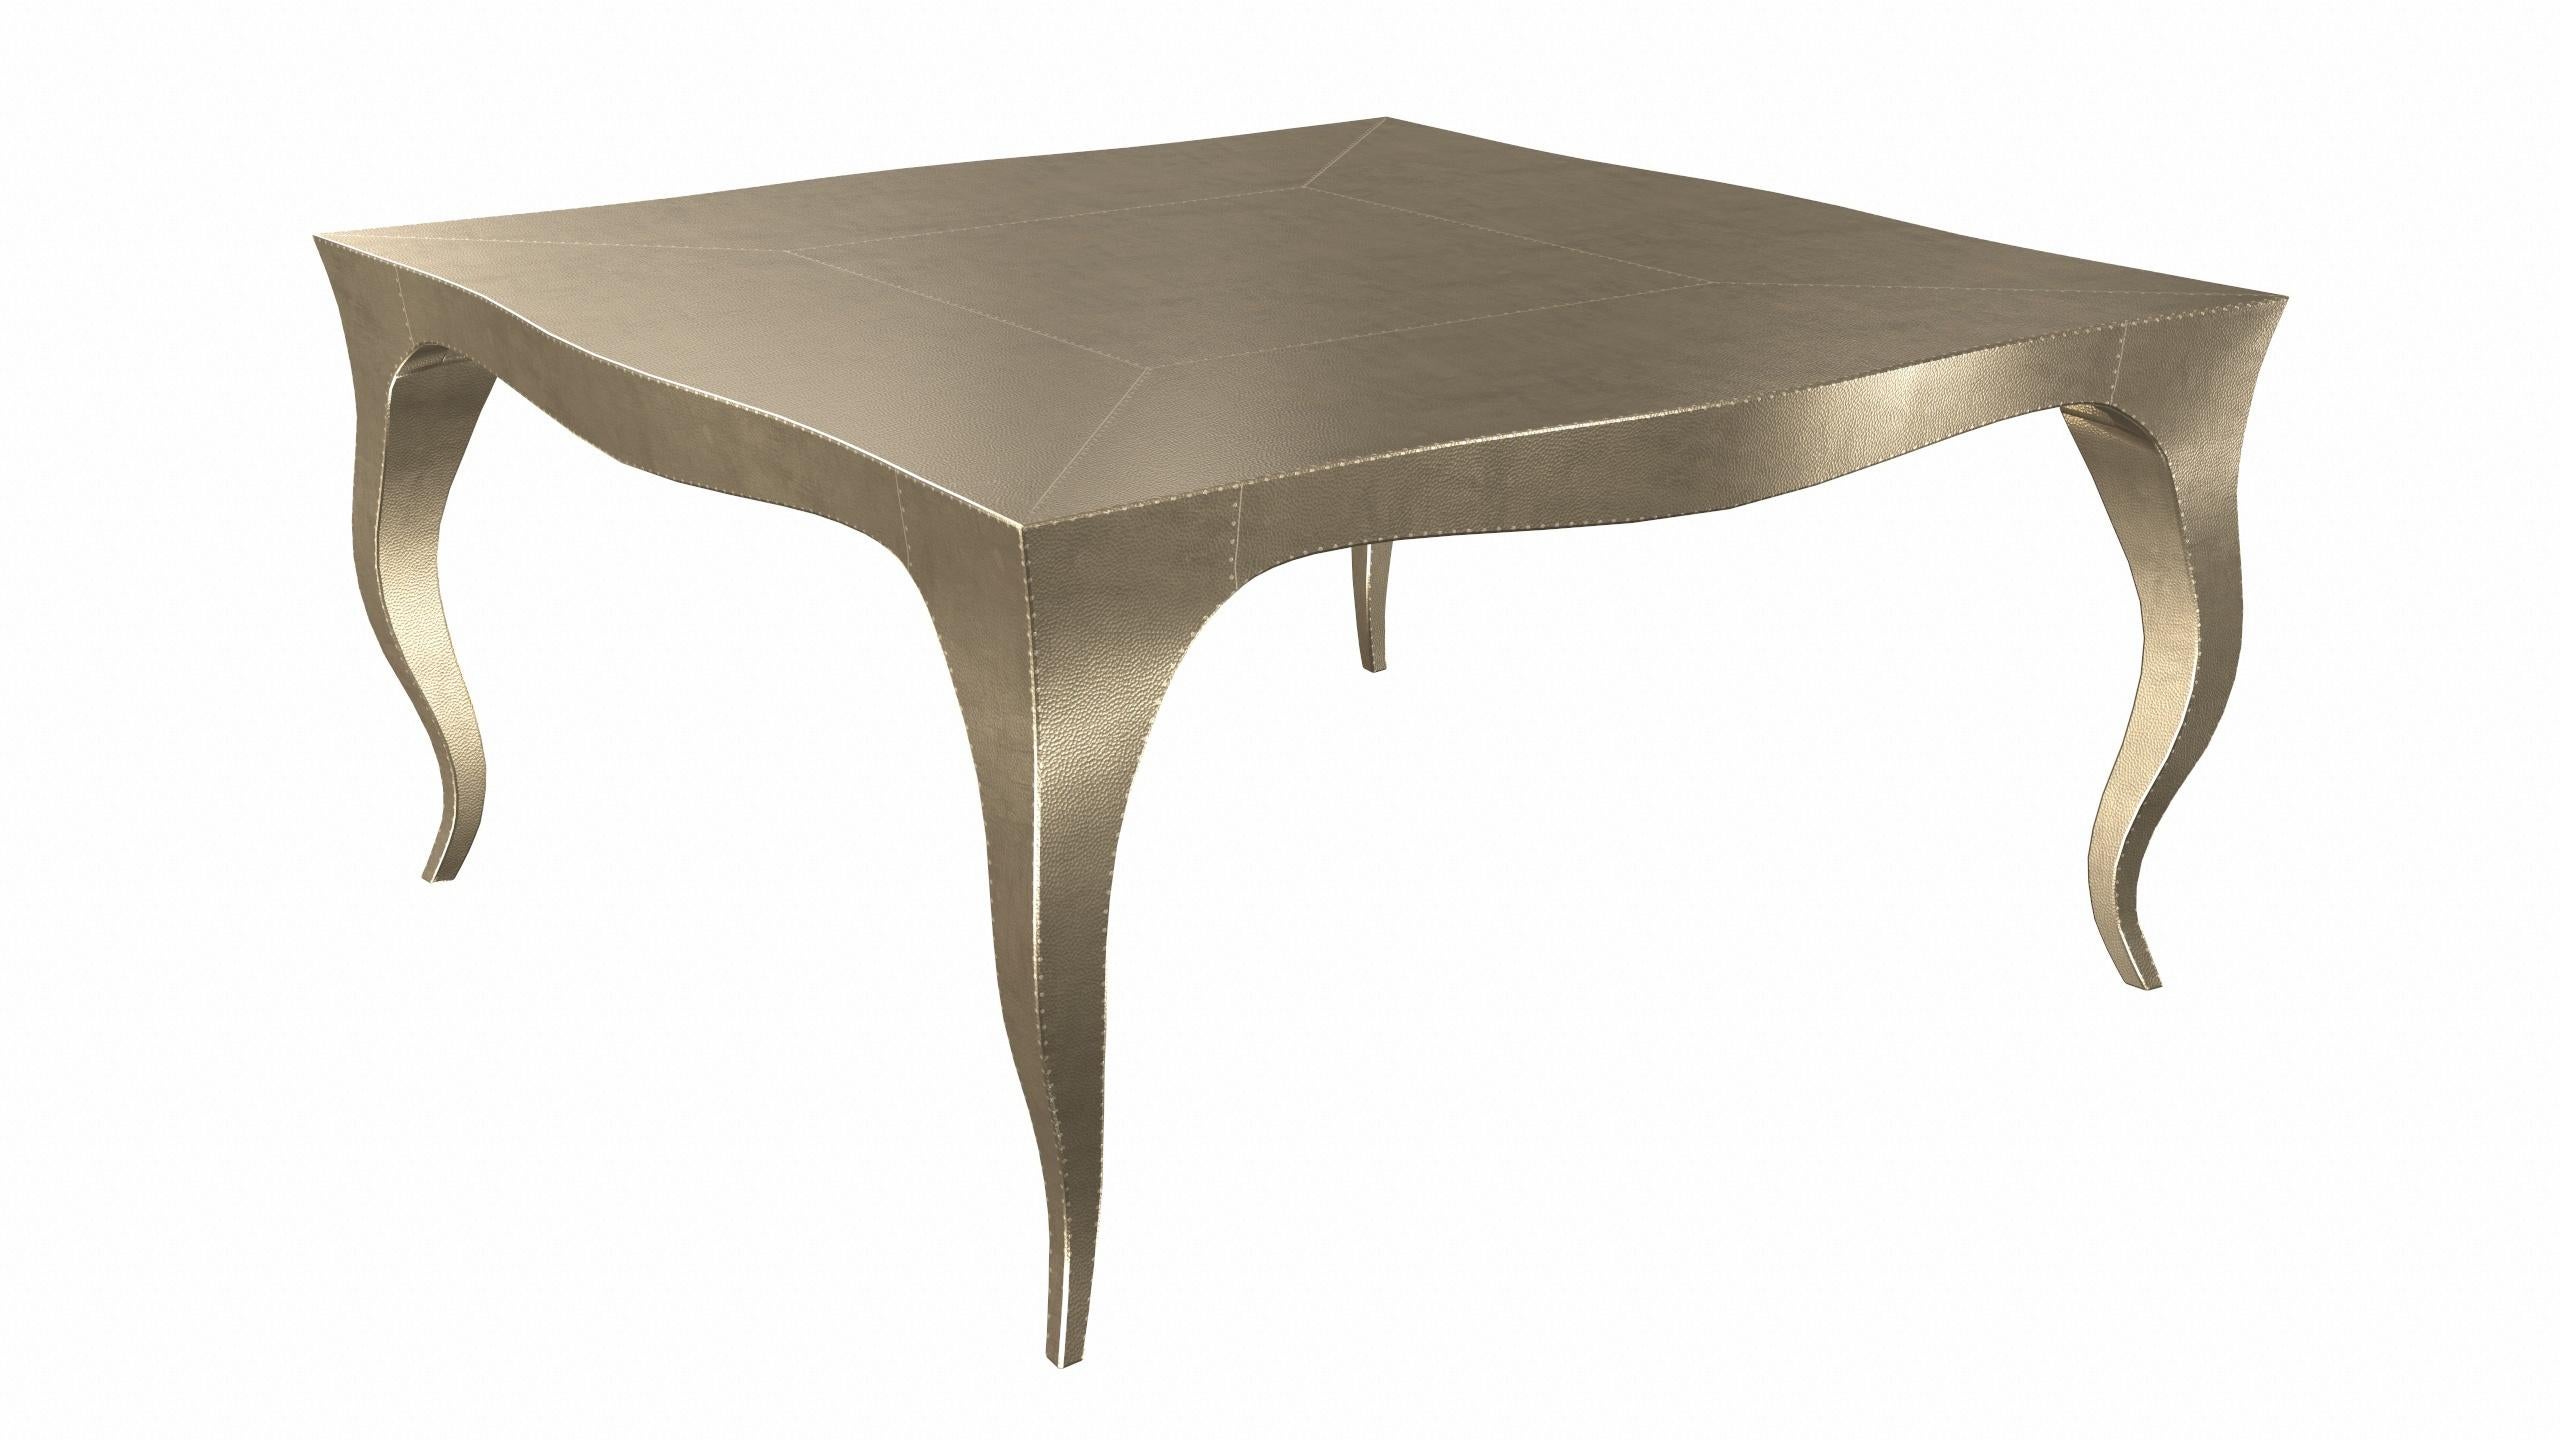 Contemporary Louise Art Deco Industrial and Work Tables Mid. Hammered Brass by Paul Mathieu For Sale